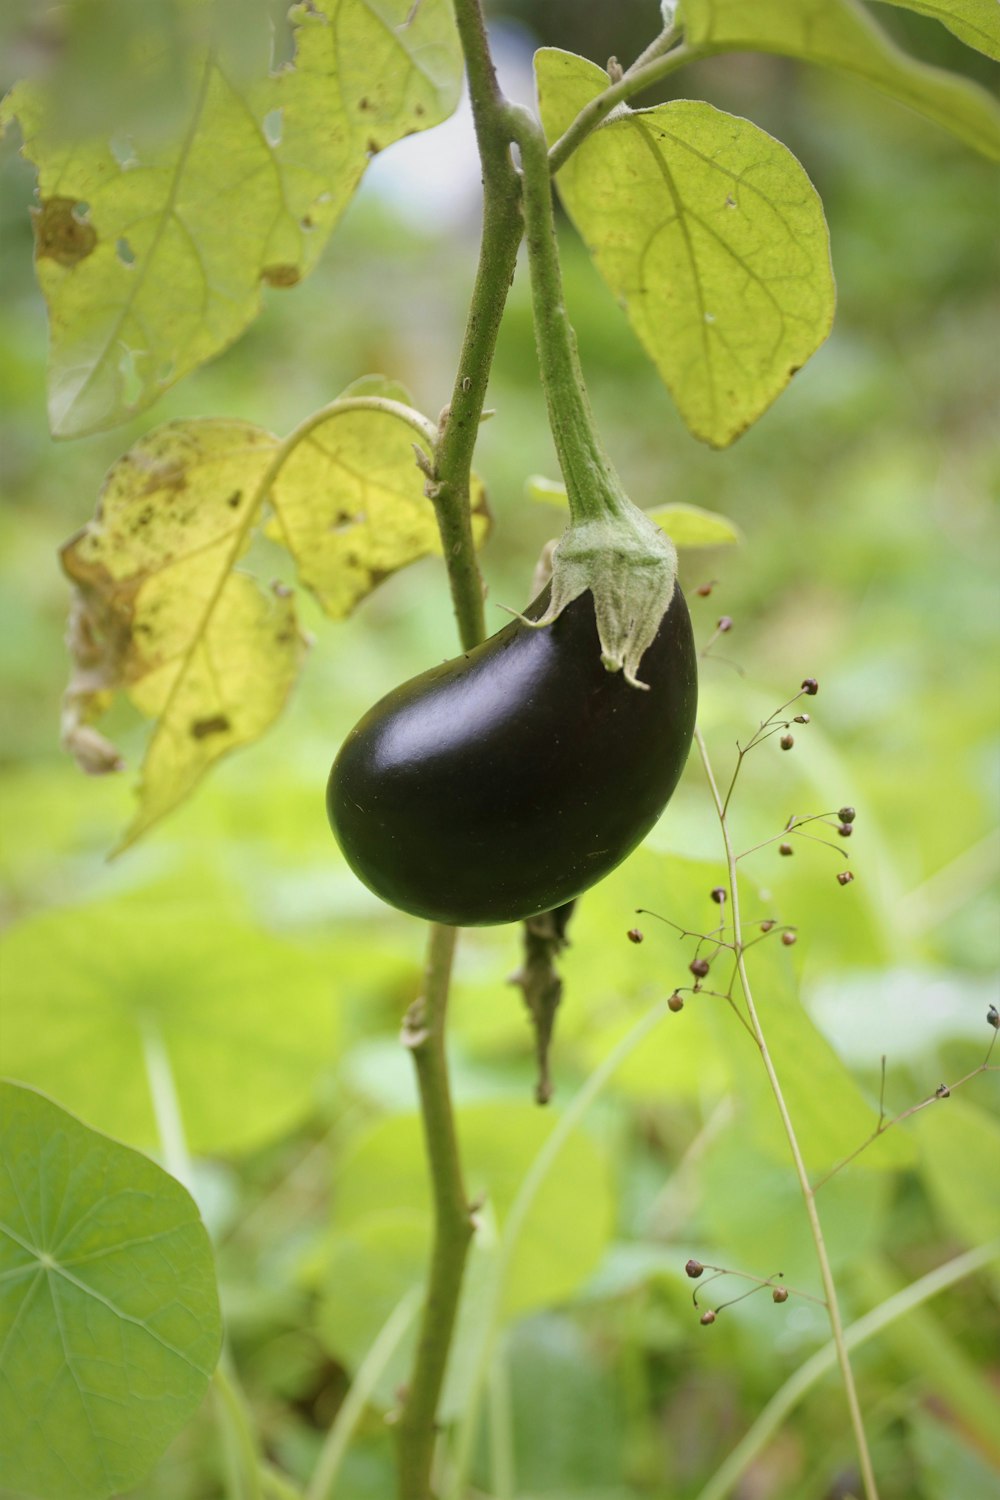 a black eggplant growing on a plant in a garden